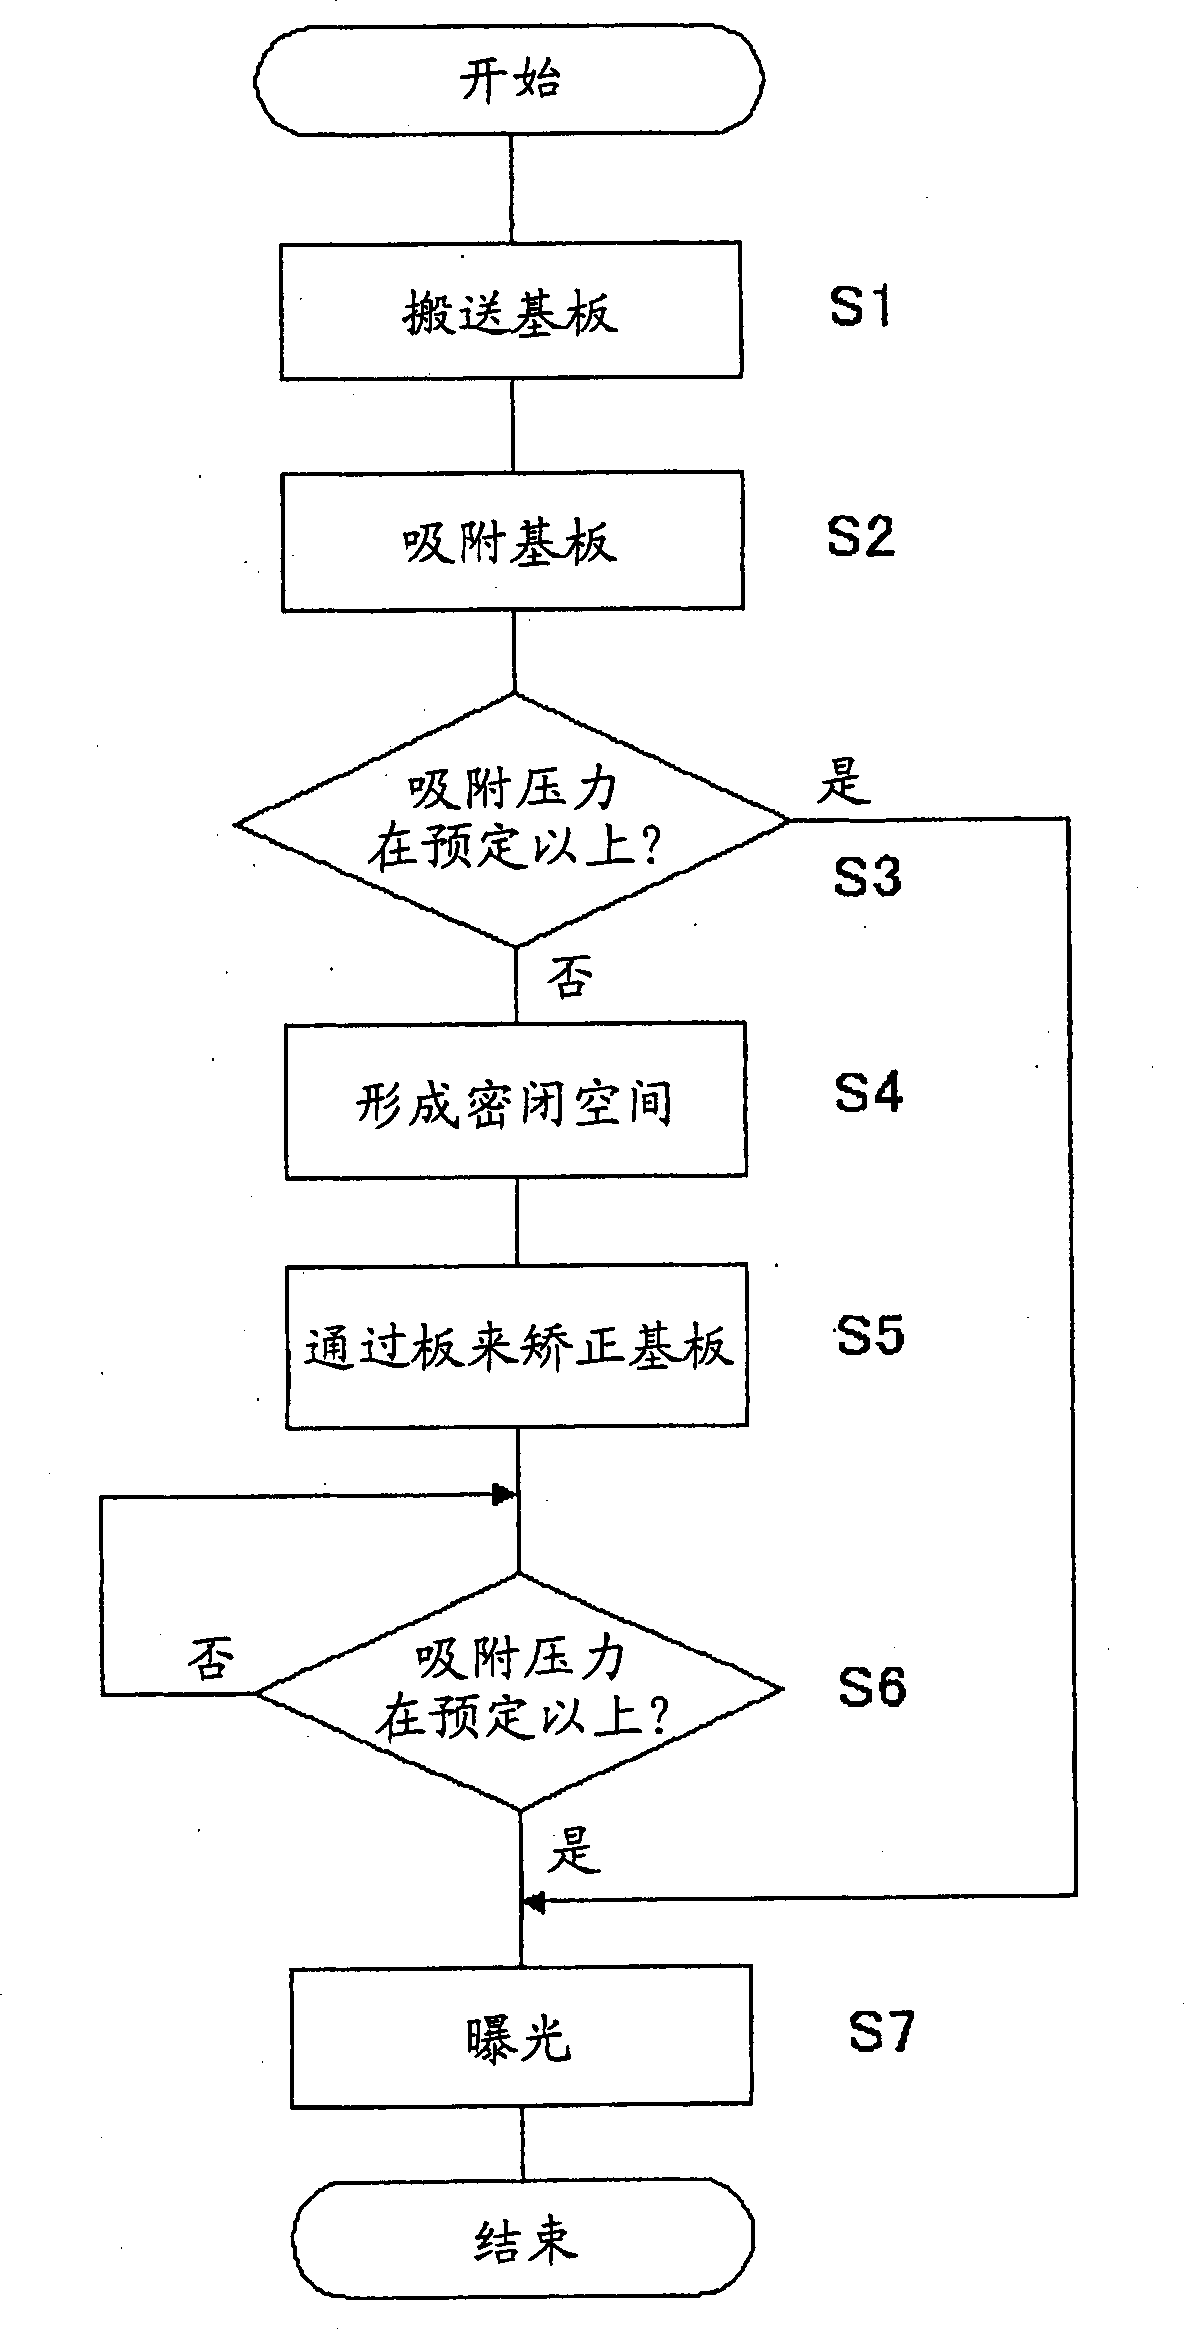 Exposure device and rectification device of baseal plate